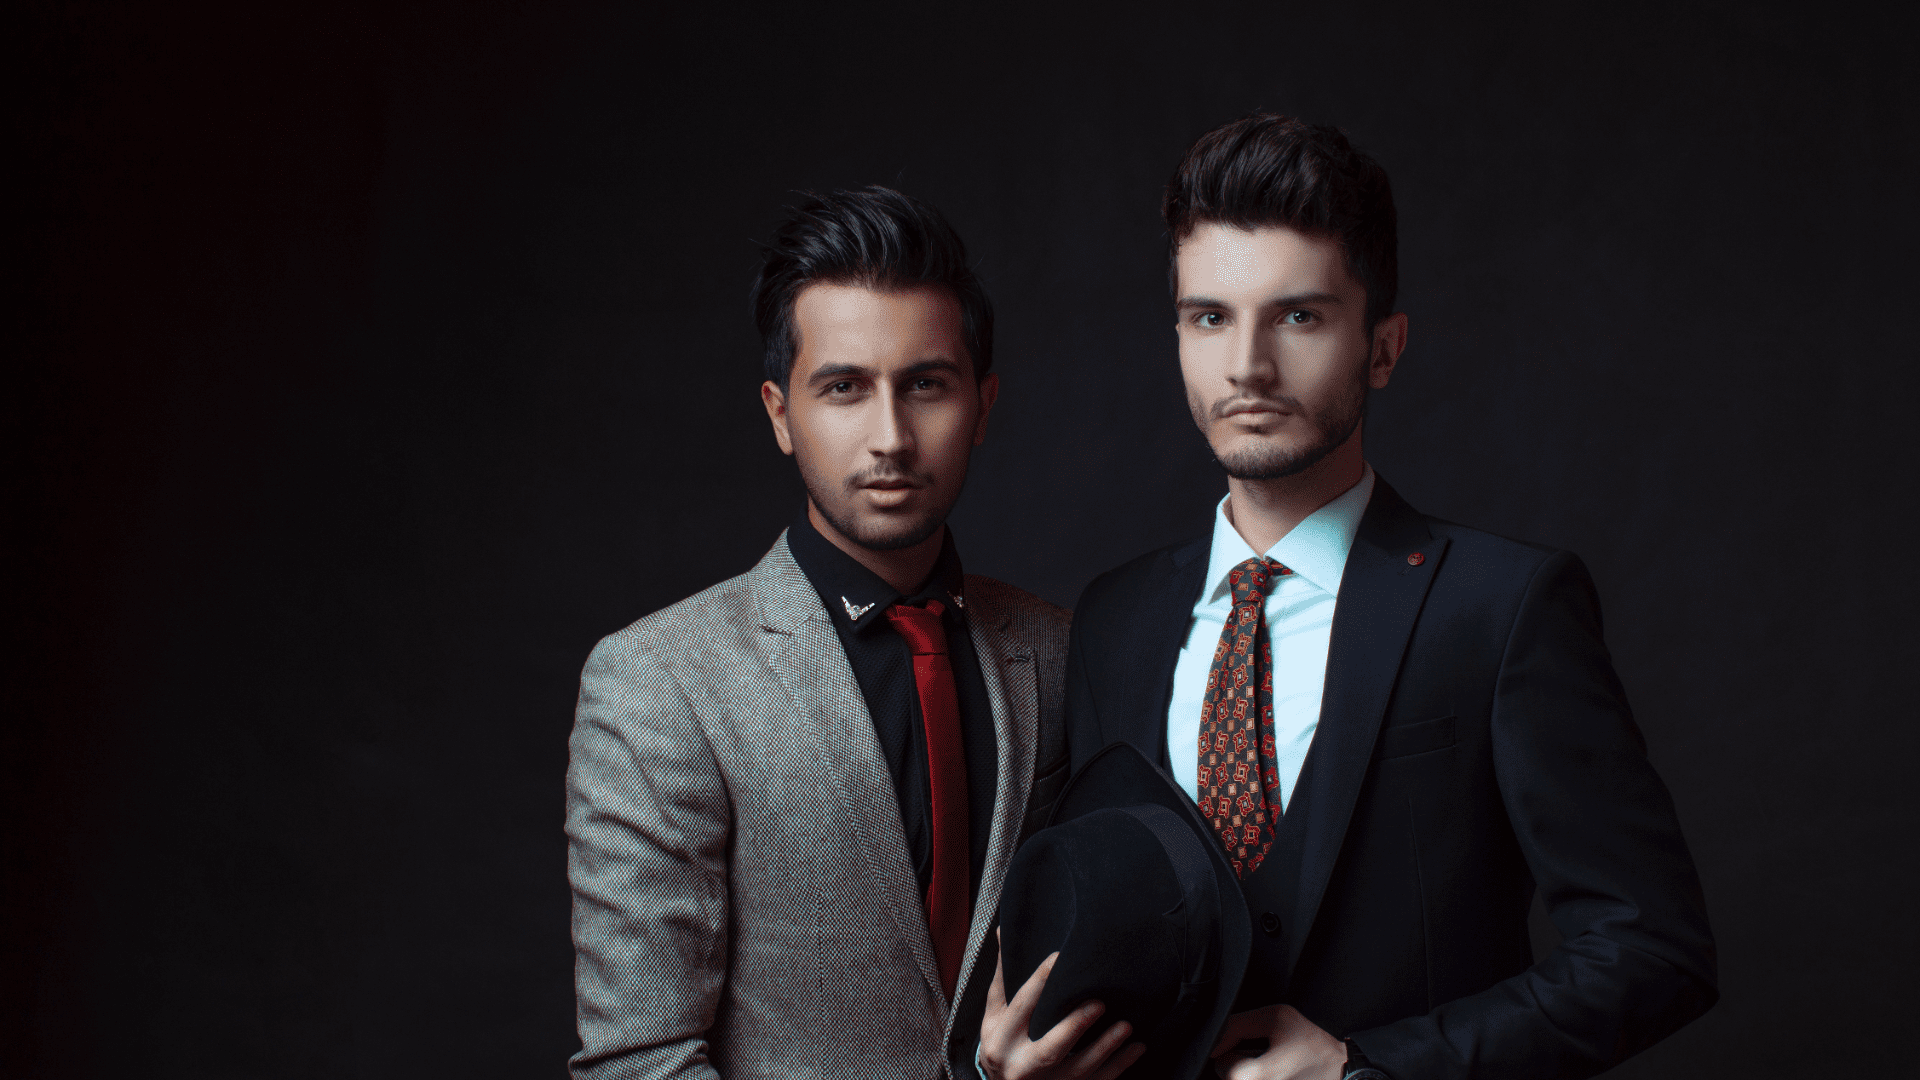 Men's fashion tips with two guys in suits.